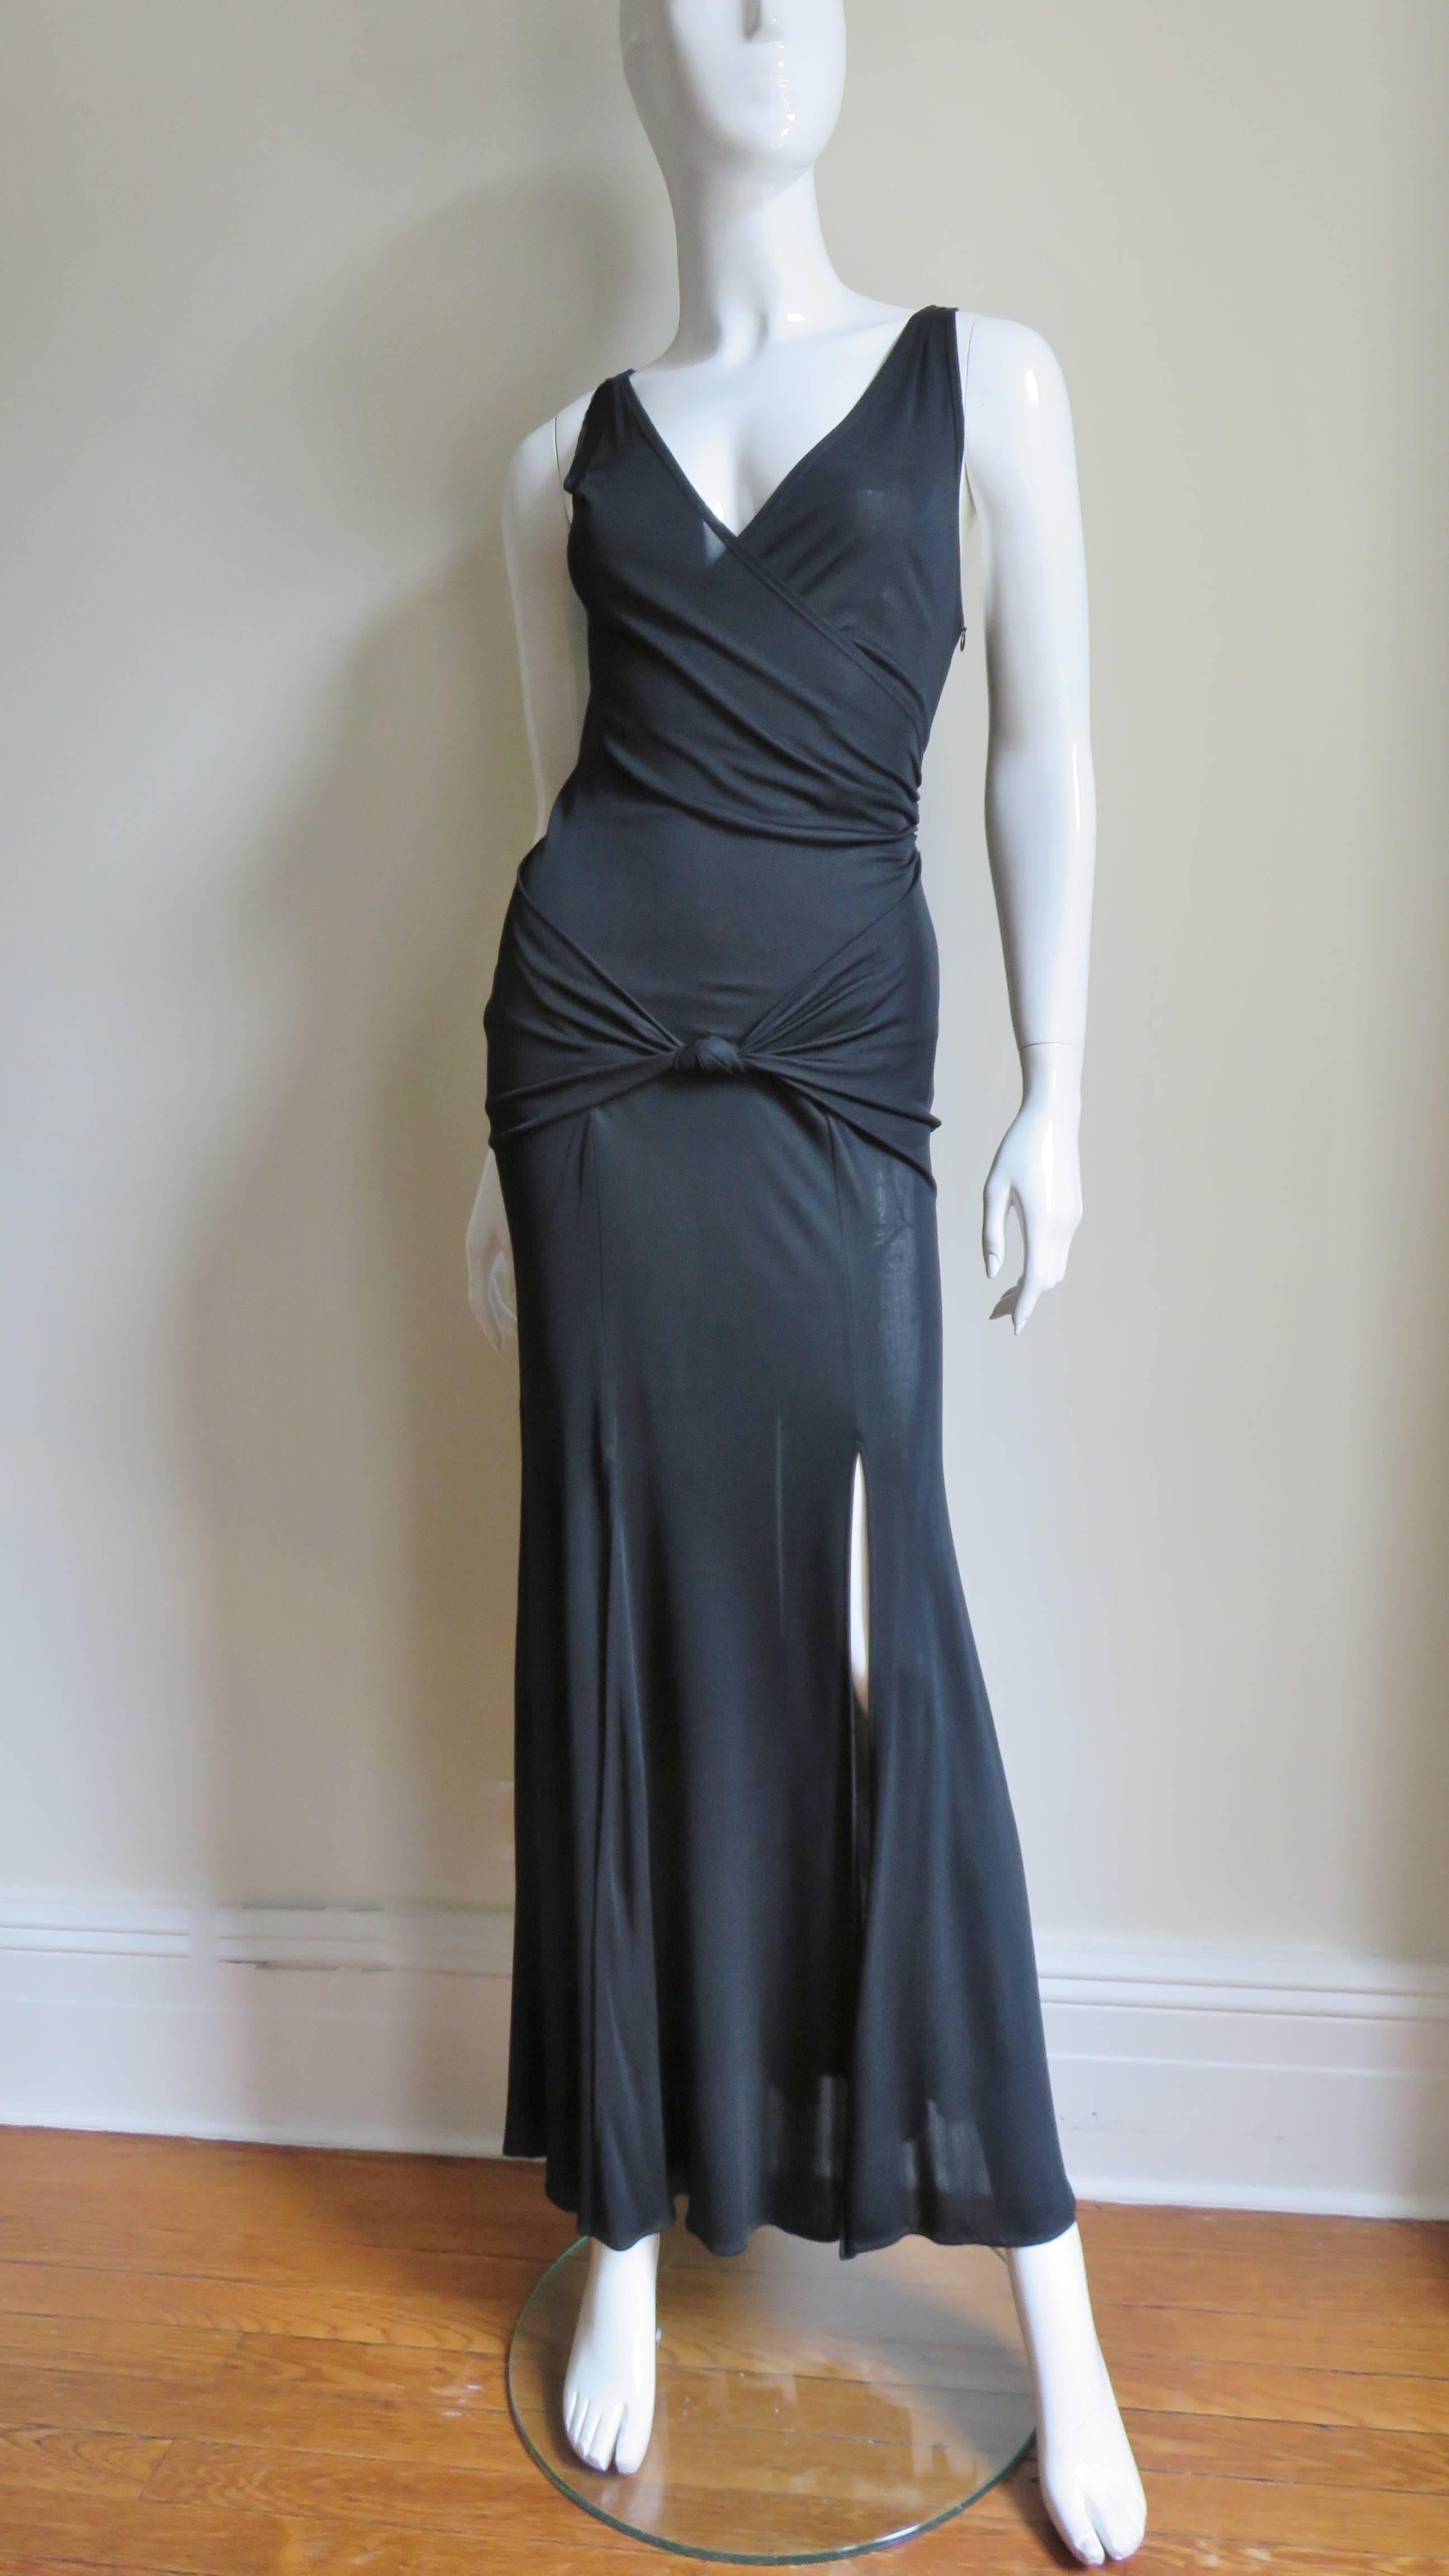 Moschino Wrap Car Wash Hem Maxi Dress In Good Condition For Sale In Water Mill, NY